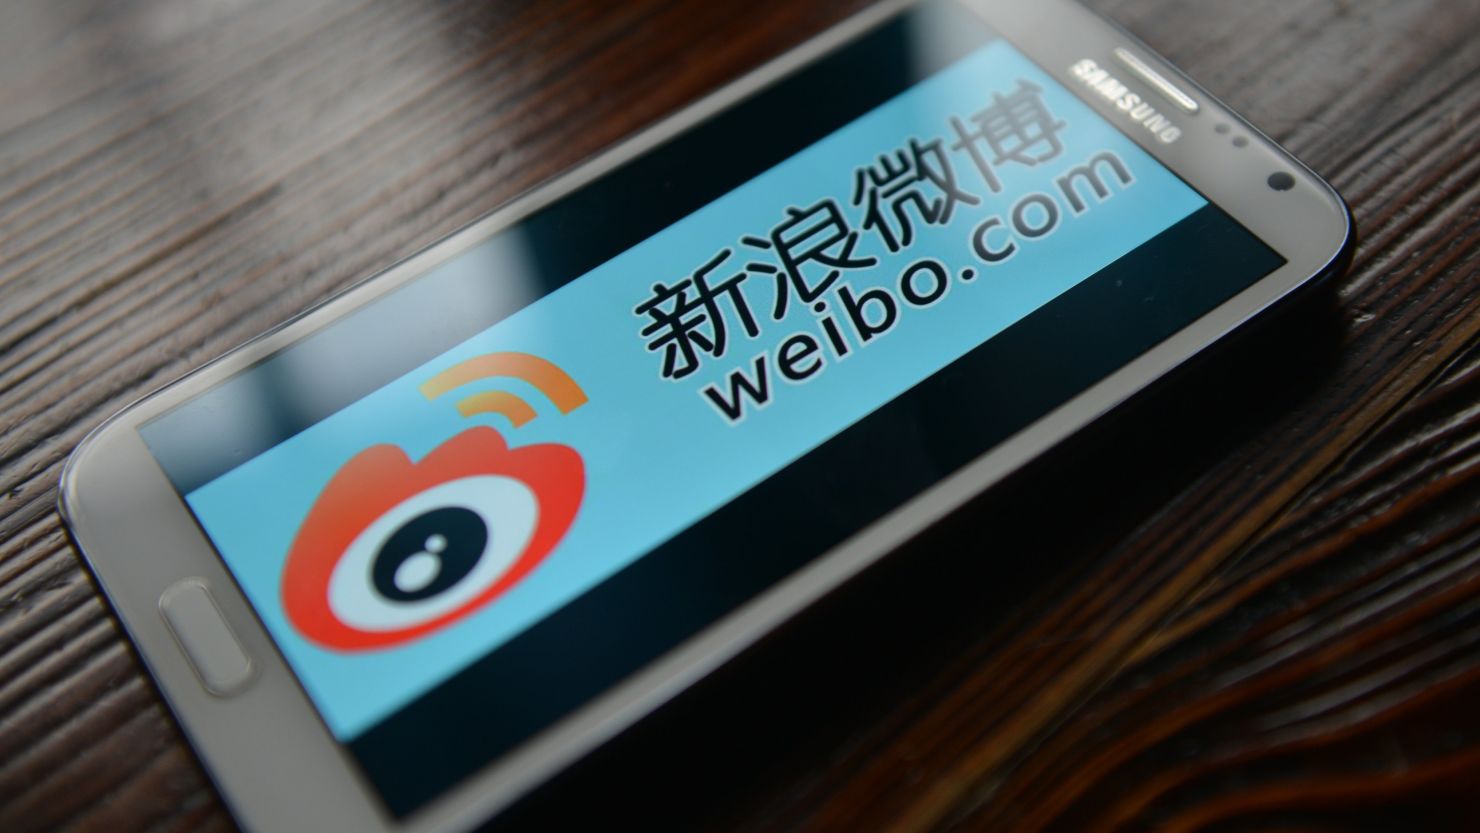 Chinese microblogging platform, Weibo, is often compared to Twitter.